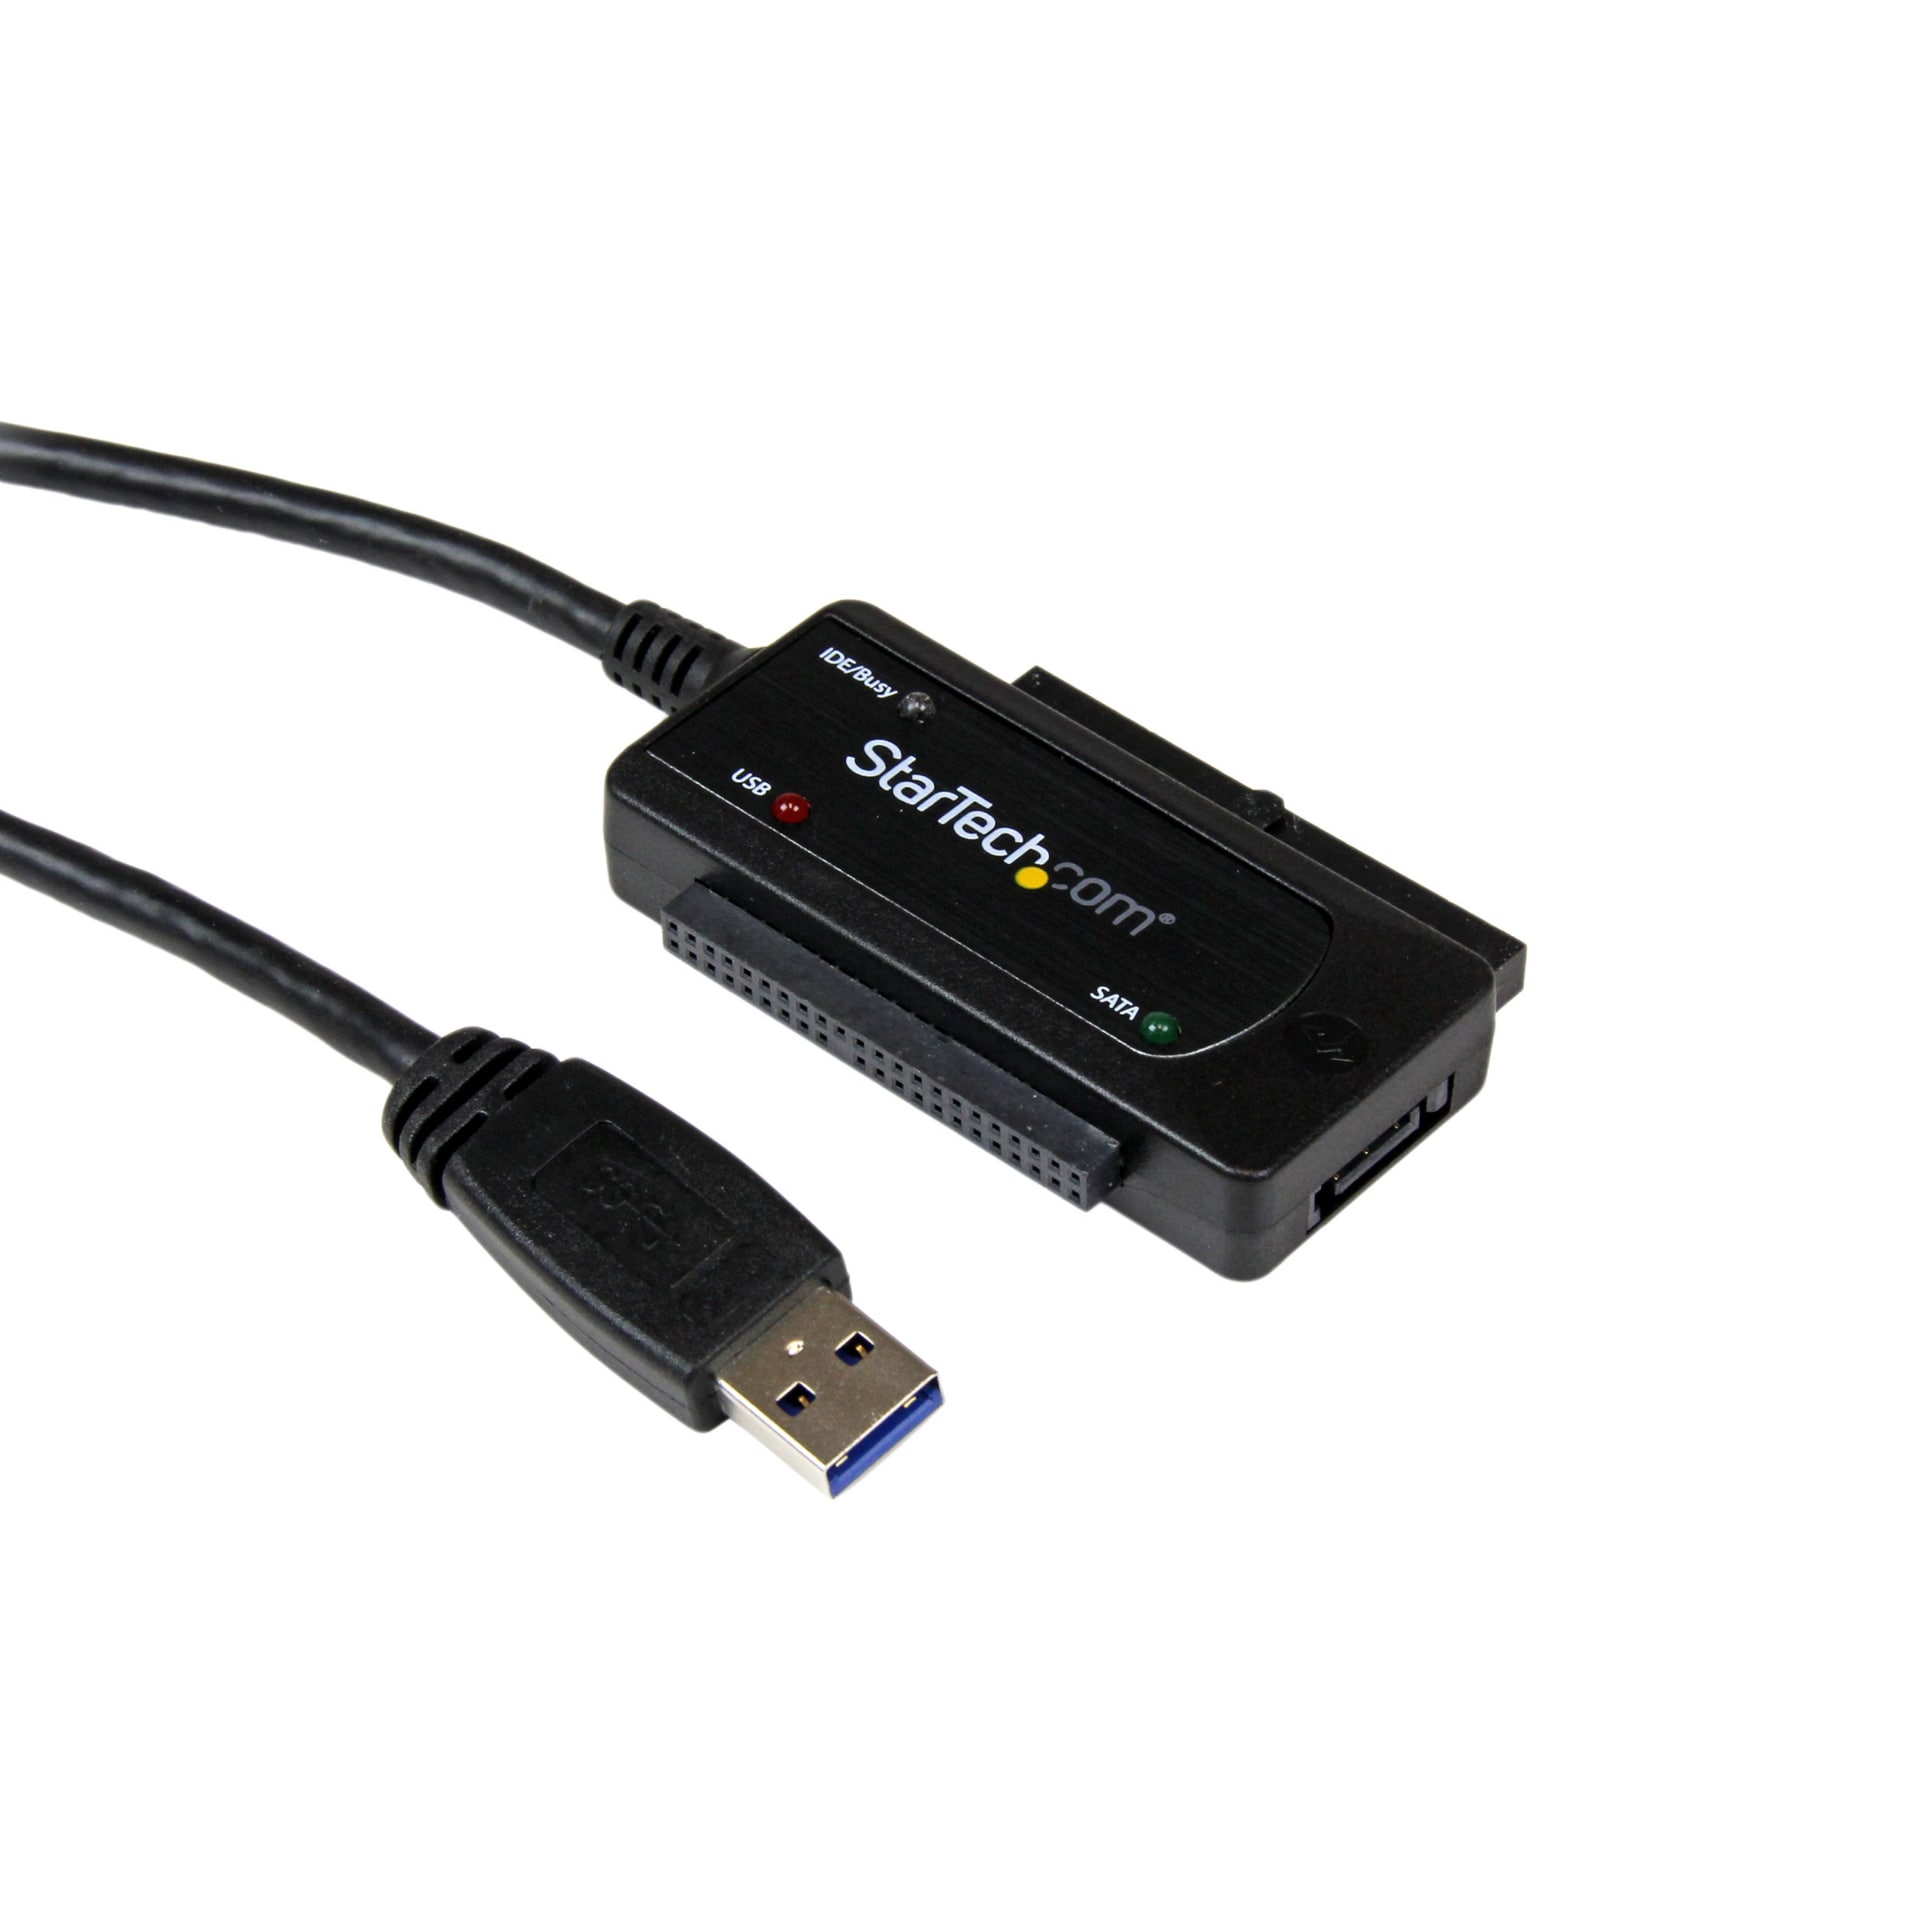 USB 3.0 to SATA / IDE Hard Drive Adapter - Drive Adapters and Drive  Converters, Hard Drive Accessories